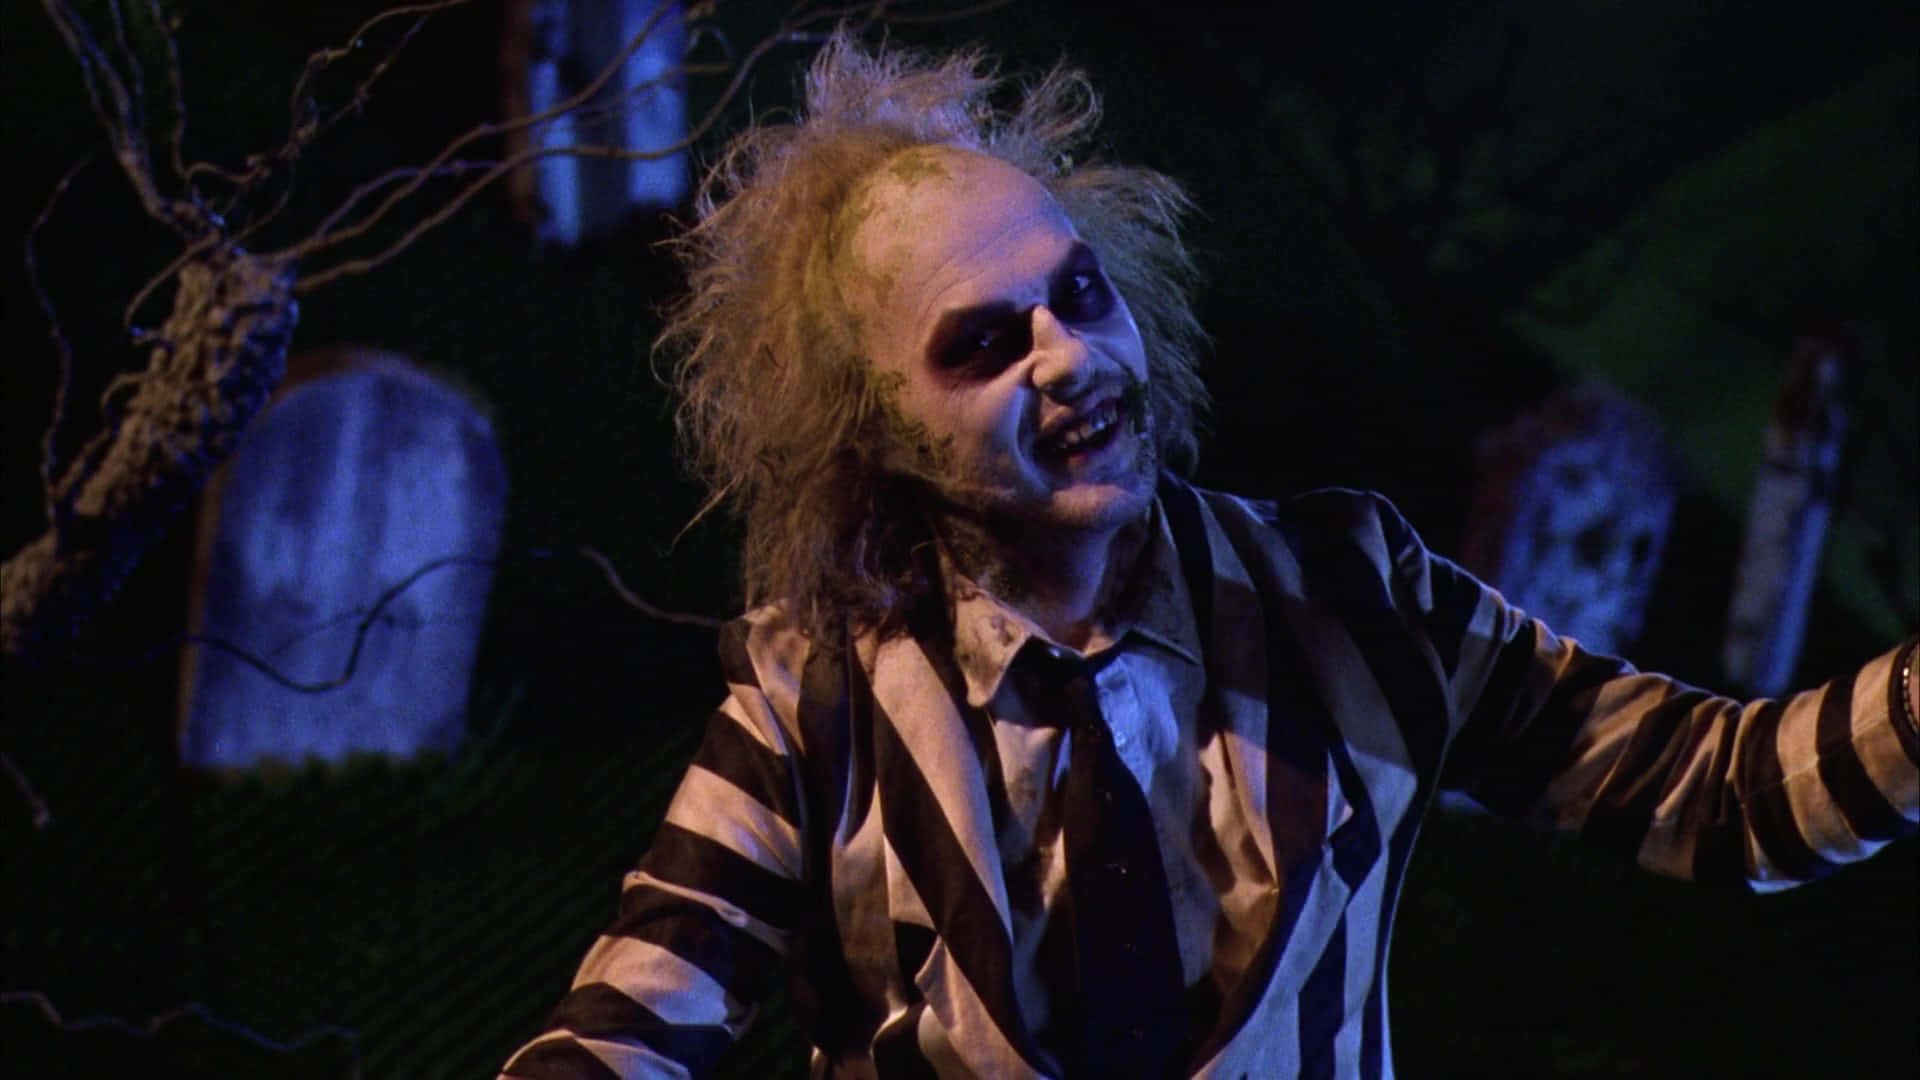 Beetlejuice posing with his iconic twisted grin